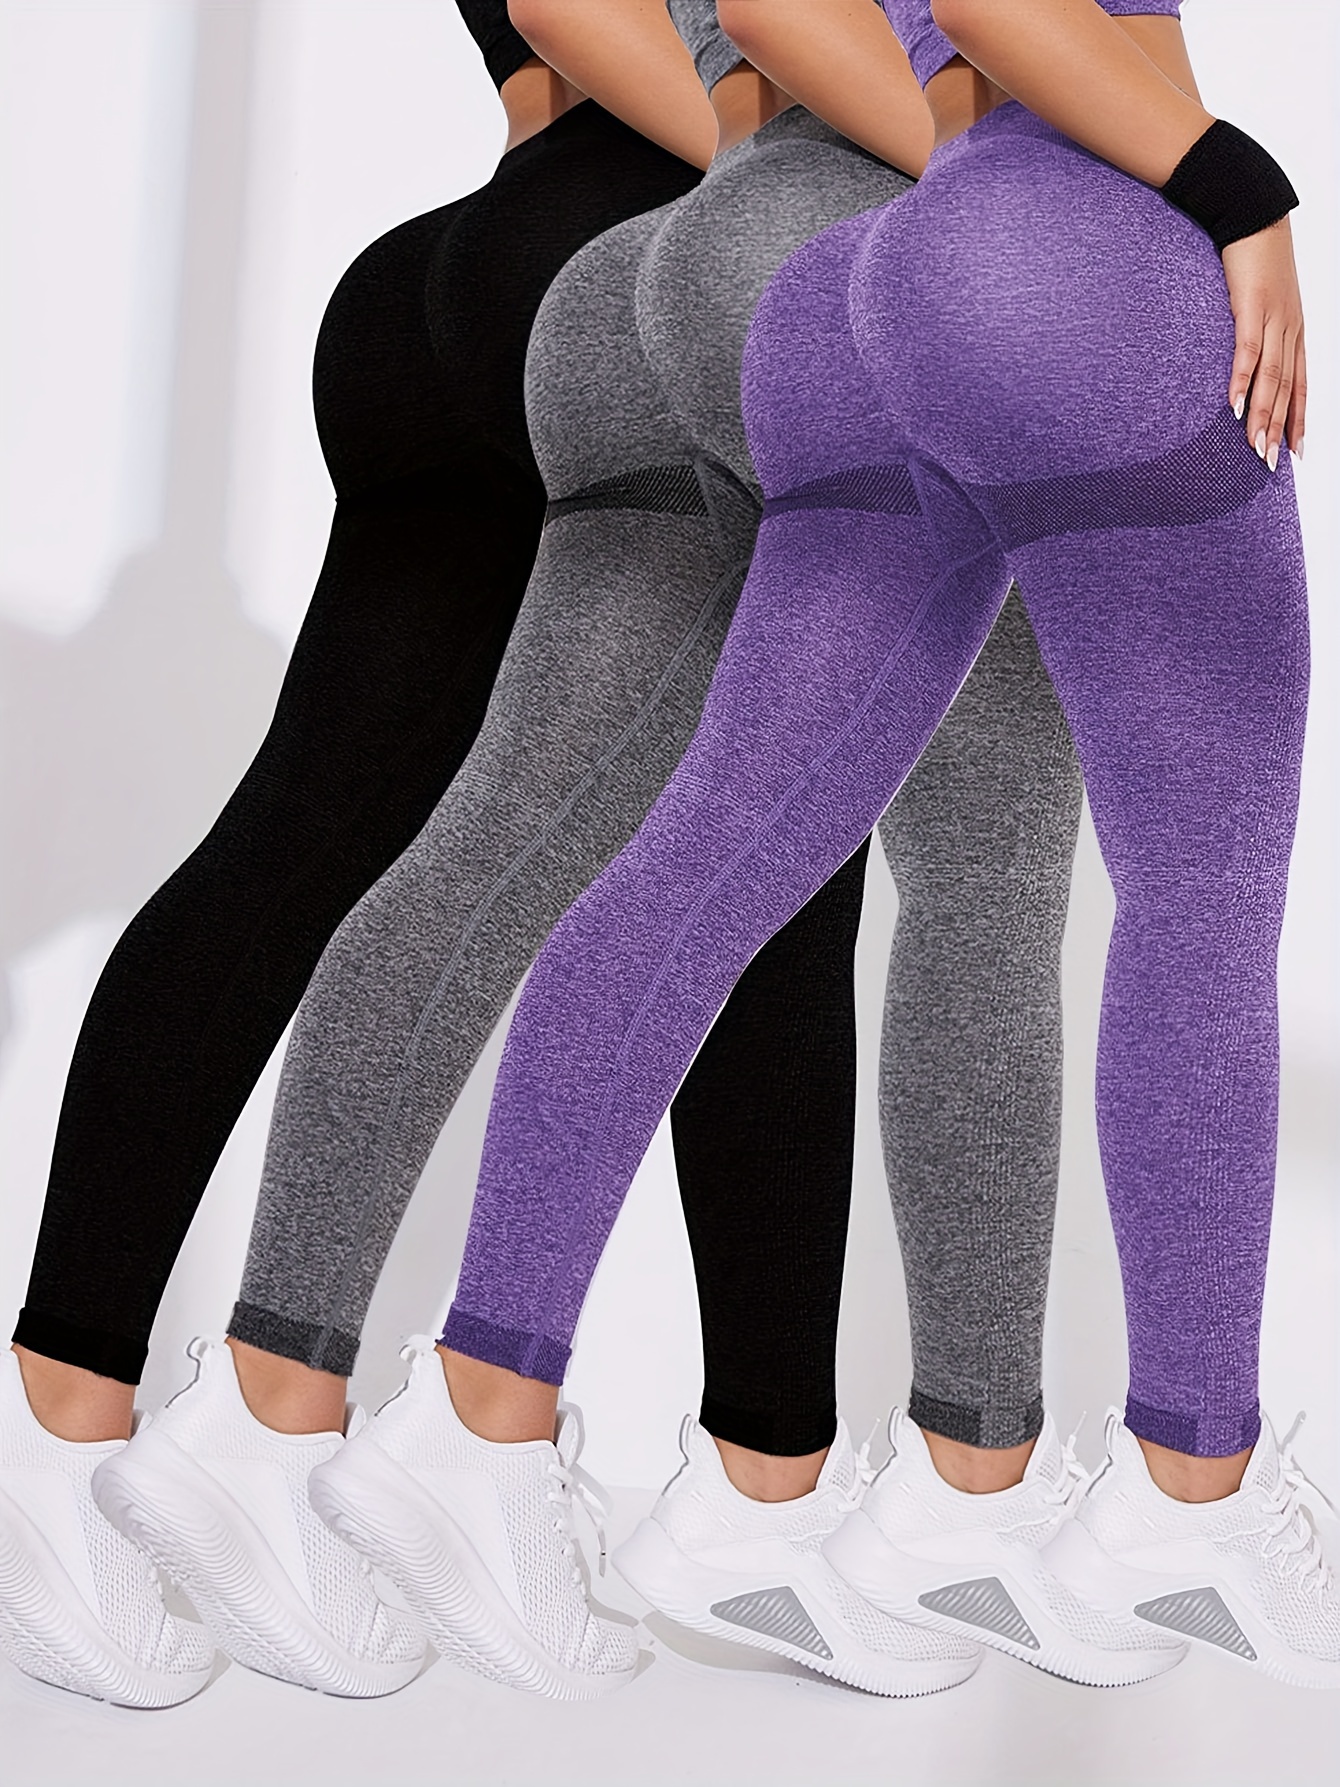 Yoga Pants Gym Shark High-waist Stretch Running Fitness Yoga Pants Workout  licras deportiva de mujer Sports wear for Women Gym price in UAE,   UAE